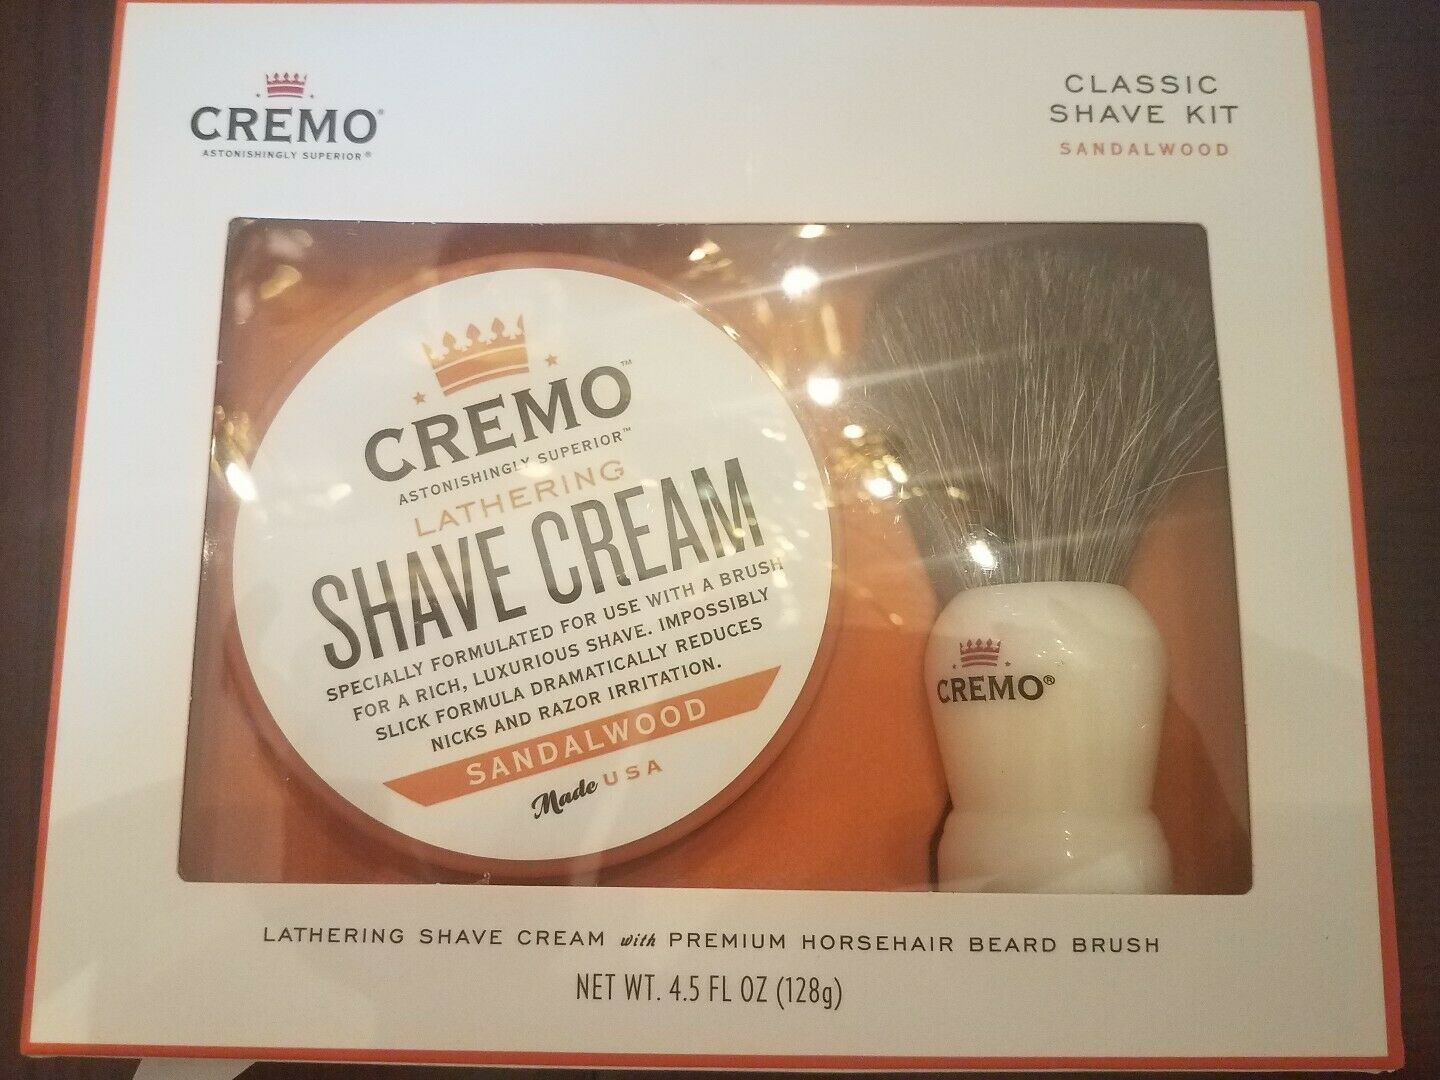 Primary image for Cremo Lathering Shave Cream Kit with Premium Horse Hair Shave Brush 4.5 FL OZ